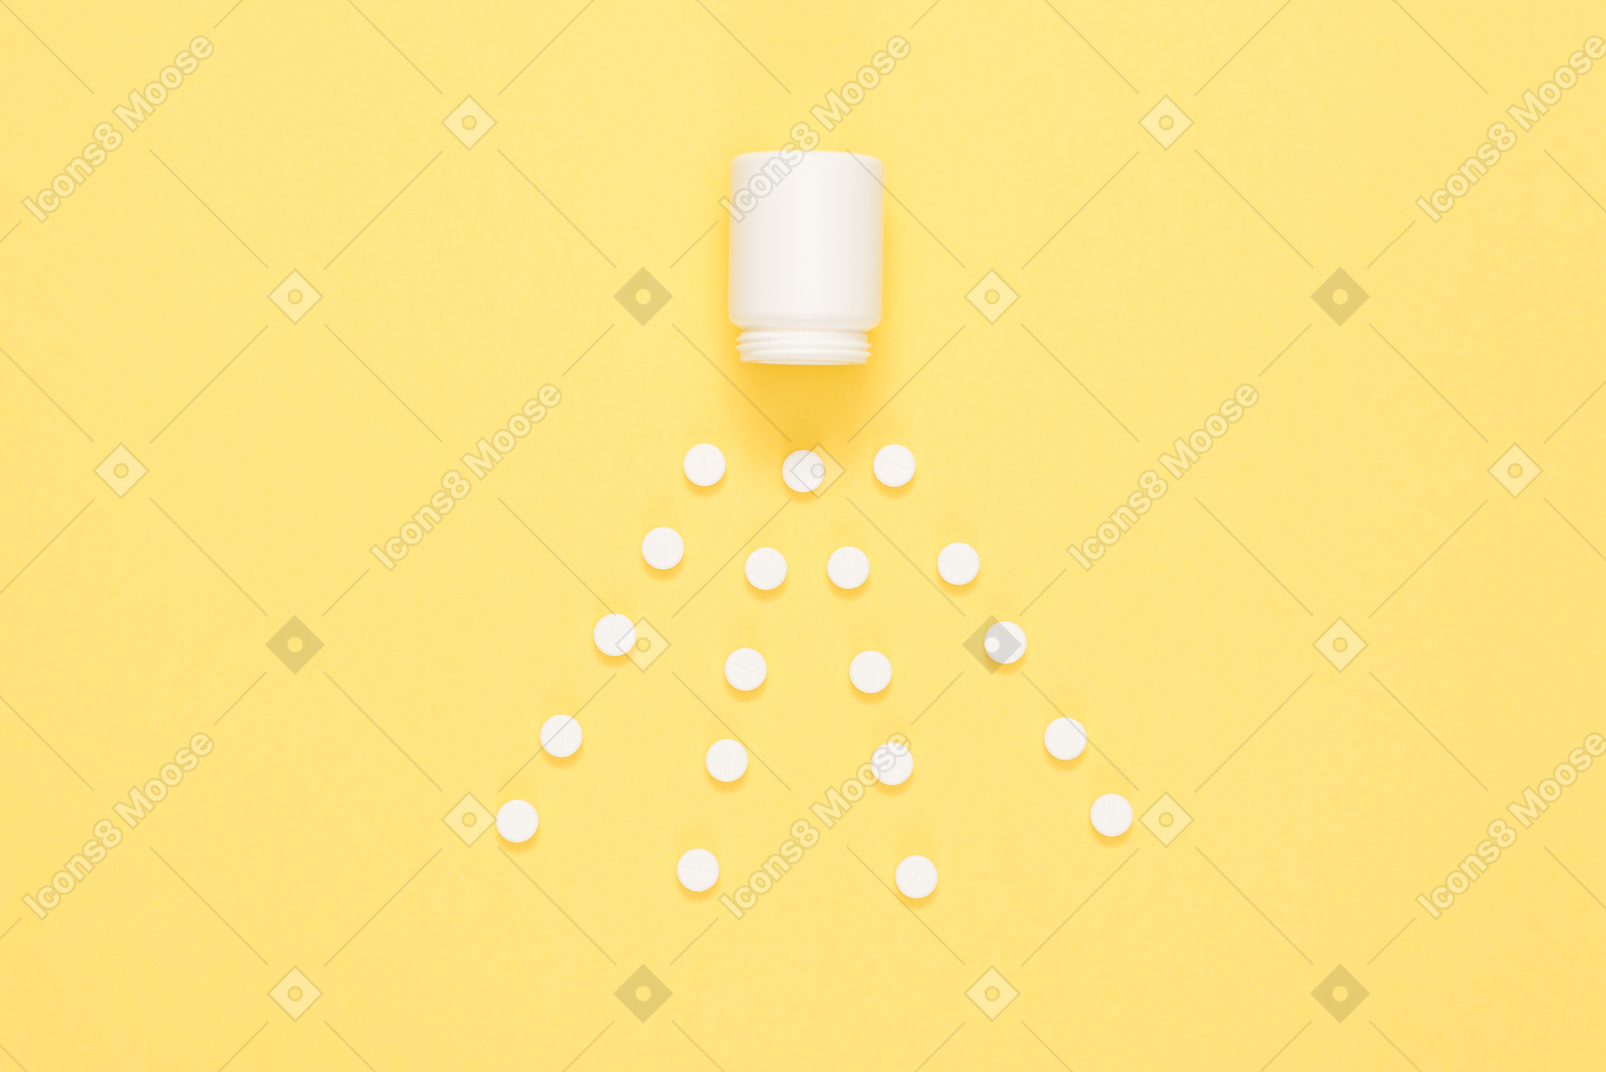 Four lines of white tablets